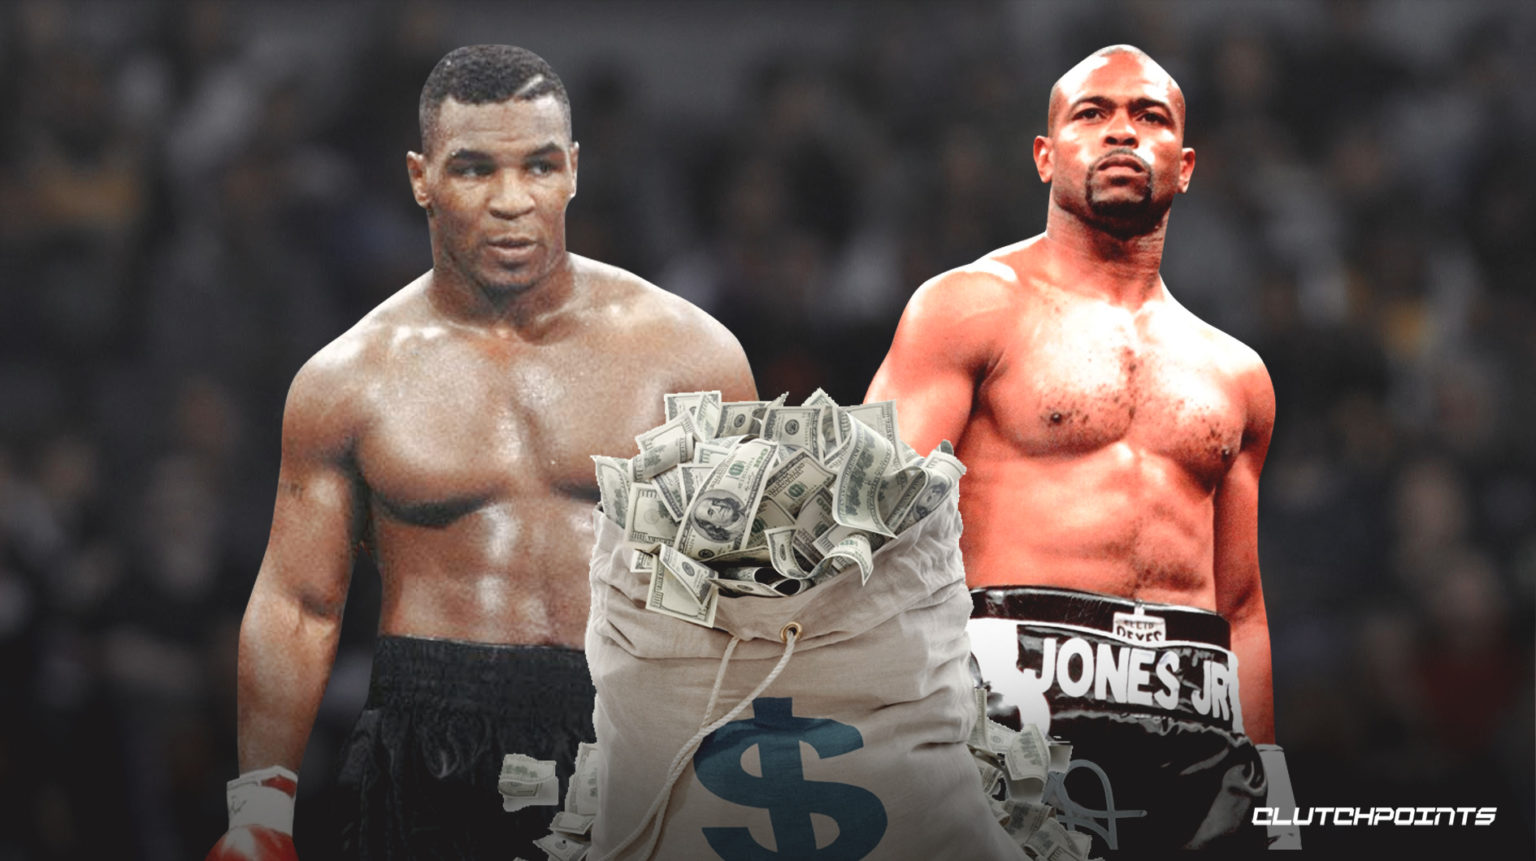 Mike-Tyson-Roy-Jones-Jr (Phto By Clutchpoints)